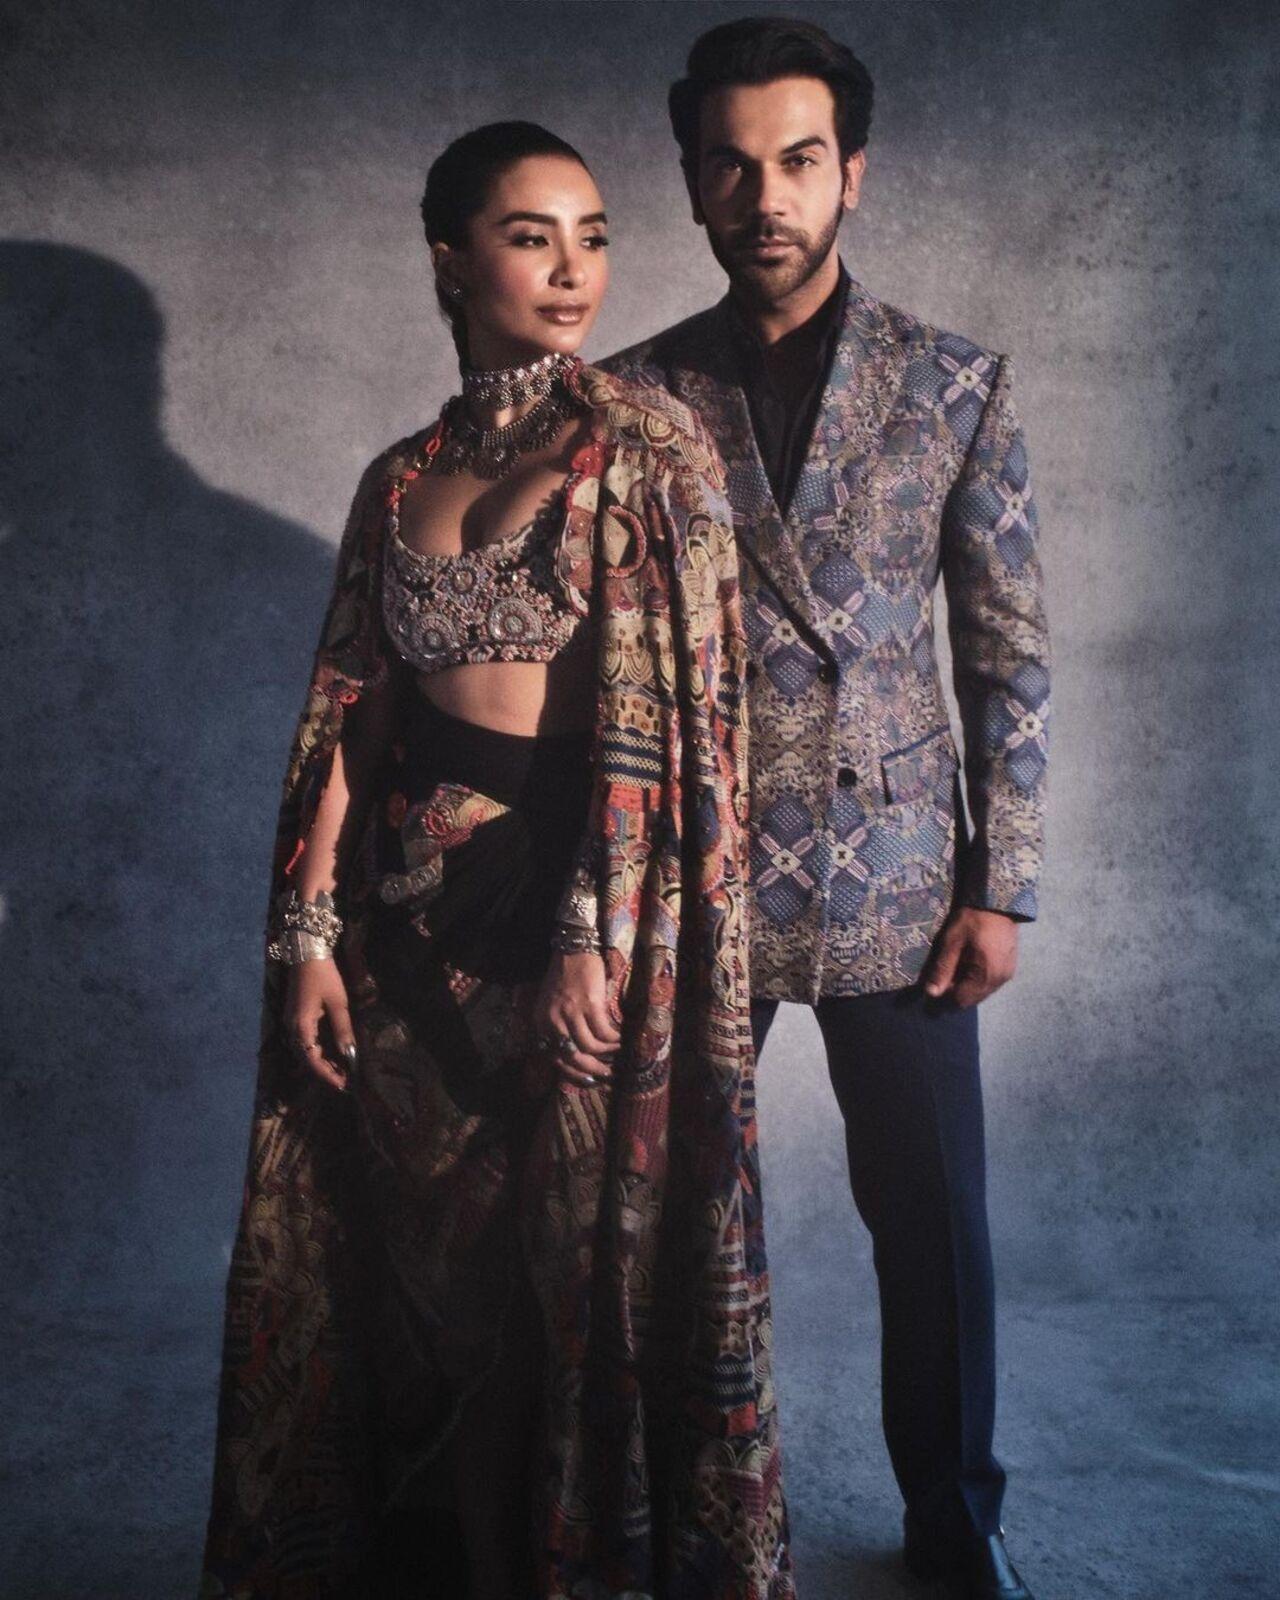 Back in 2015, in one of his interviews with the media, the 'Ludo' star openly stated that he is in a relationship with Patralekha. “I am very proud of my relationship with Patralekha. I have been dating her for more than three years,” Rajkummar had said